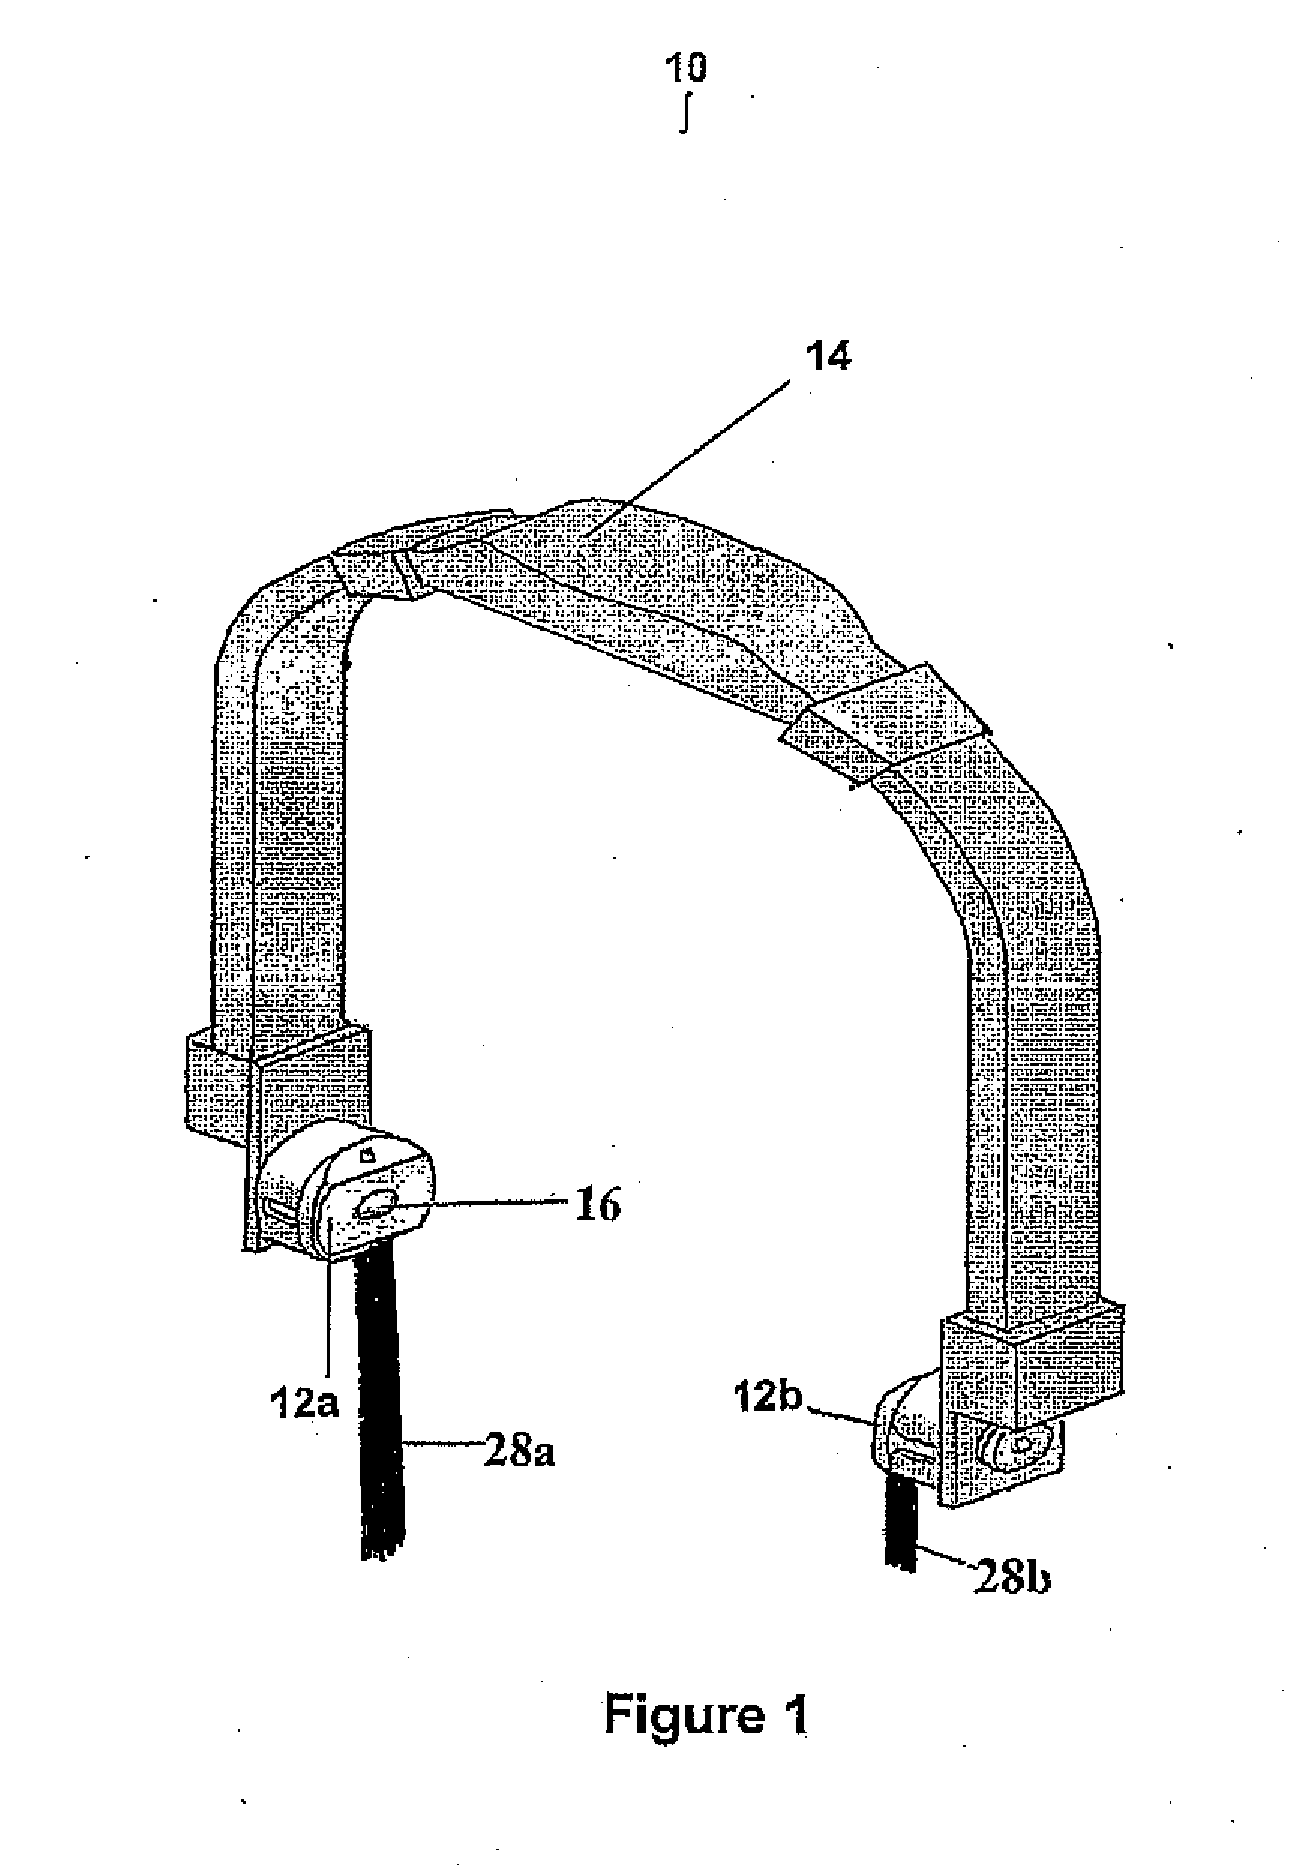 Method of determining blood pressure and an apparatus for determining blood pressure